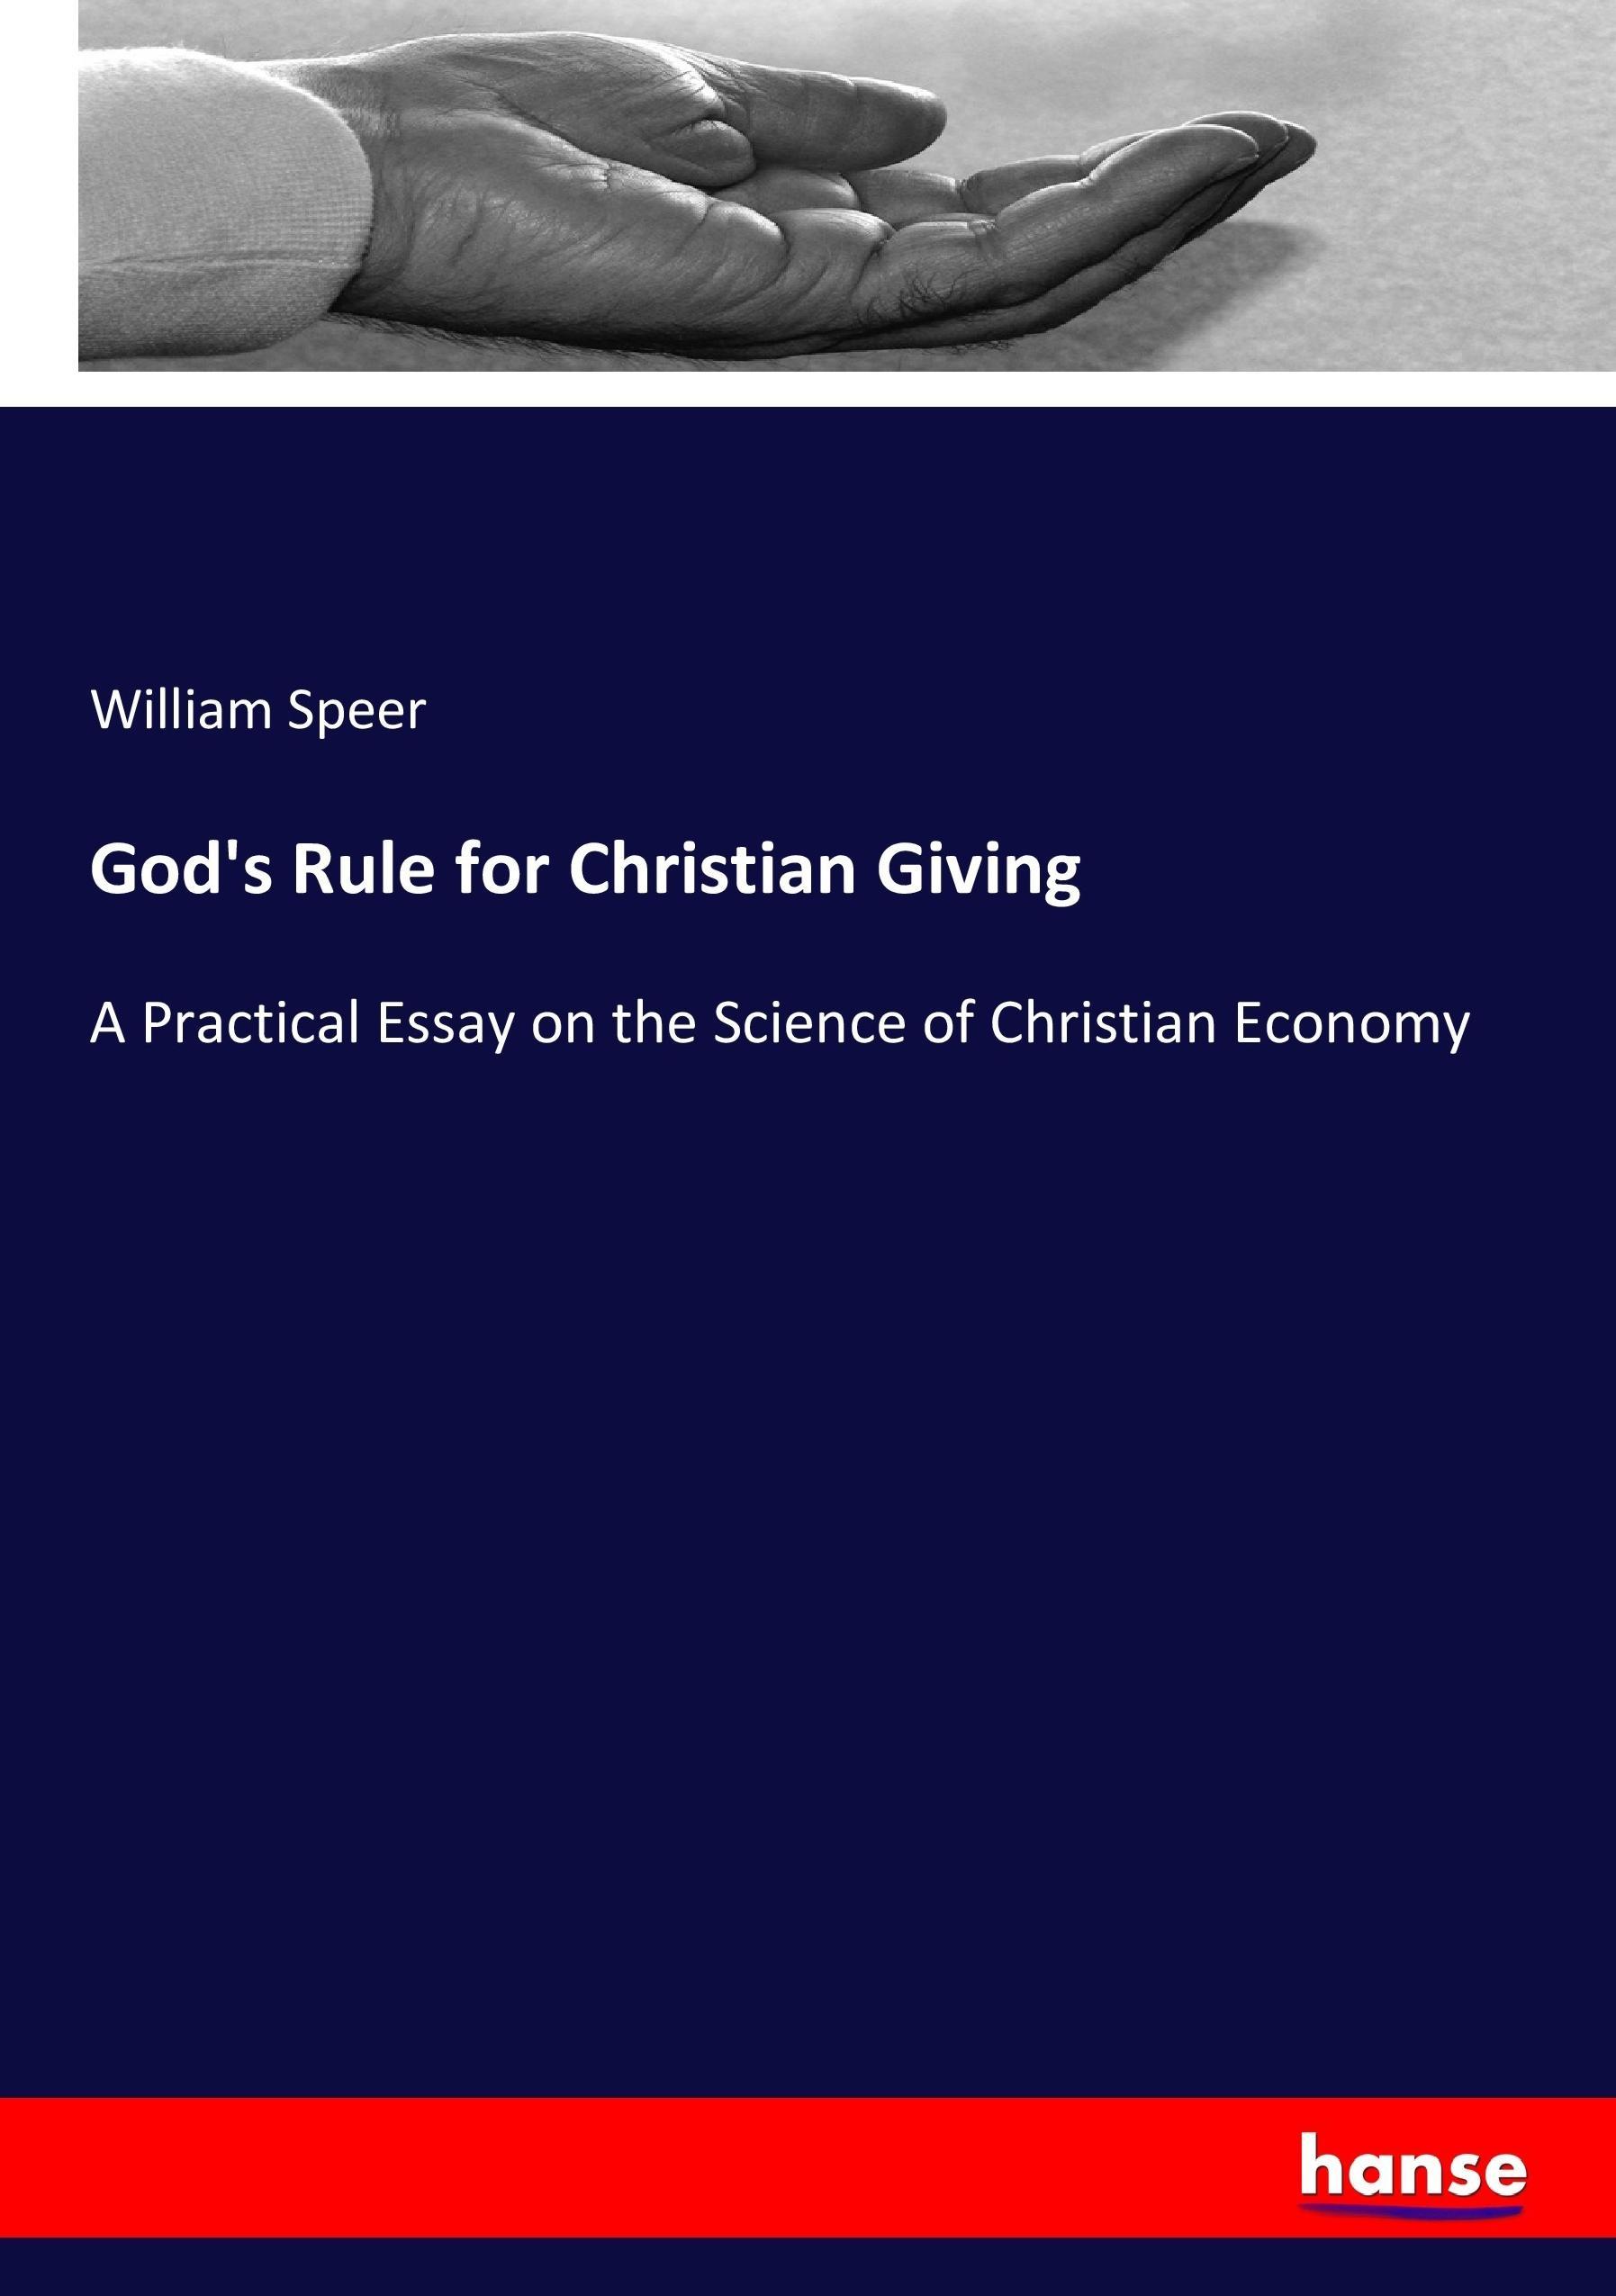 God's Rule for Christian Giving / A Practical Essay on the Science of Christian Economy / William Speer / Taschenbuch / Paperback / 276 S. / Englisch / 2017 / hansebooks / EAN 9783337159634 - Speer, William